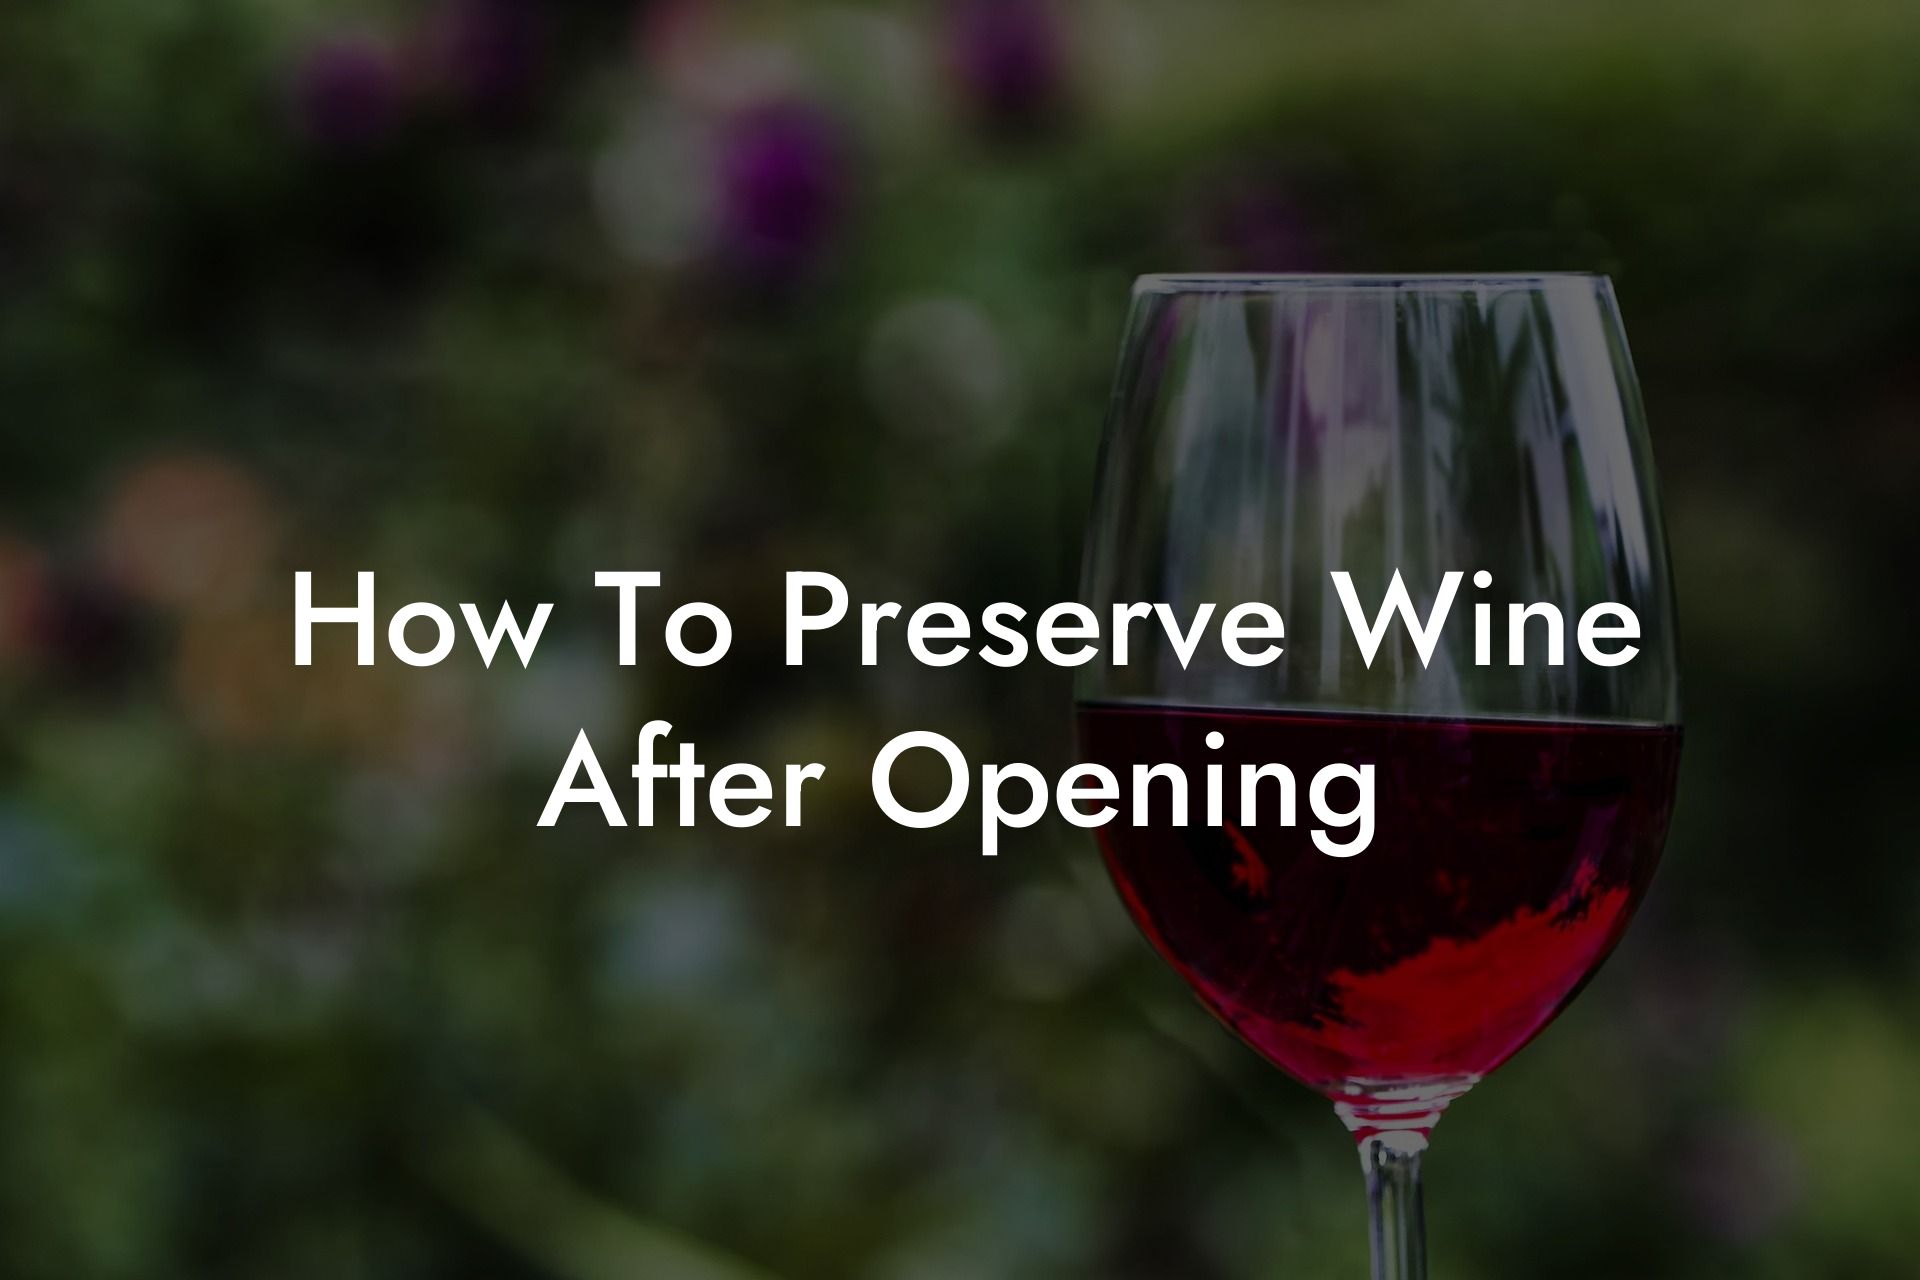 How To Preserve Wine After Opening